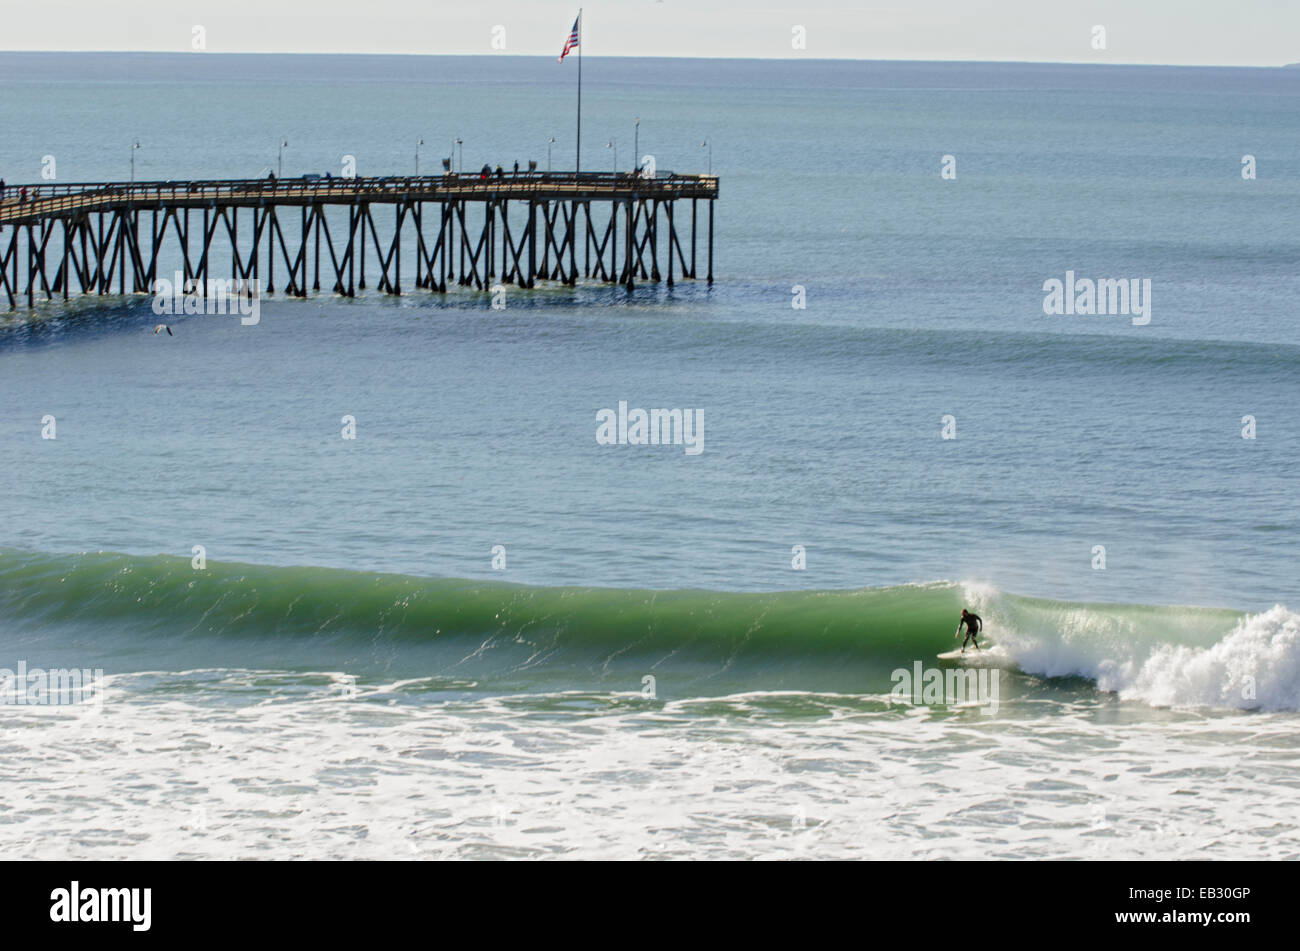 Surfer catching a wave at Surfers Point near the San Buenaventura pier. Stock Photo